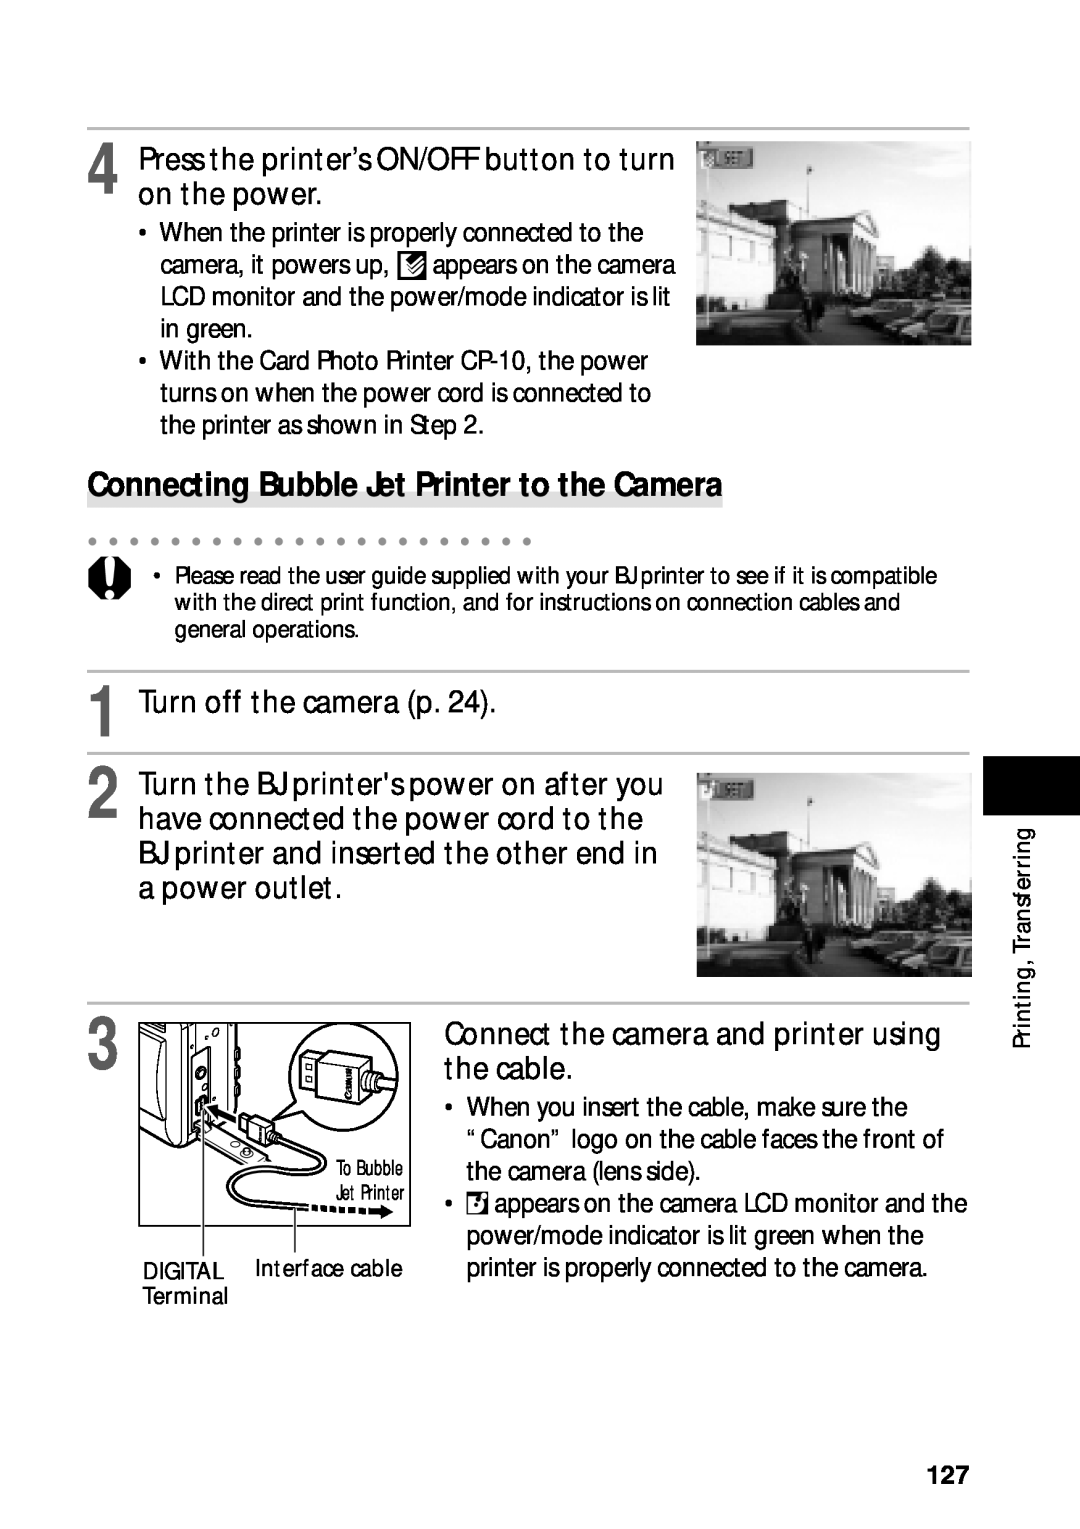 Canon PowerShot S45 Connecting Bubble Jet Printer to the Camera, Press the printer’s ON/OFF button to turn on the power 